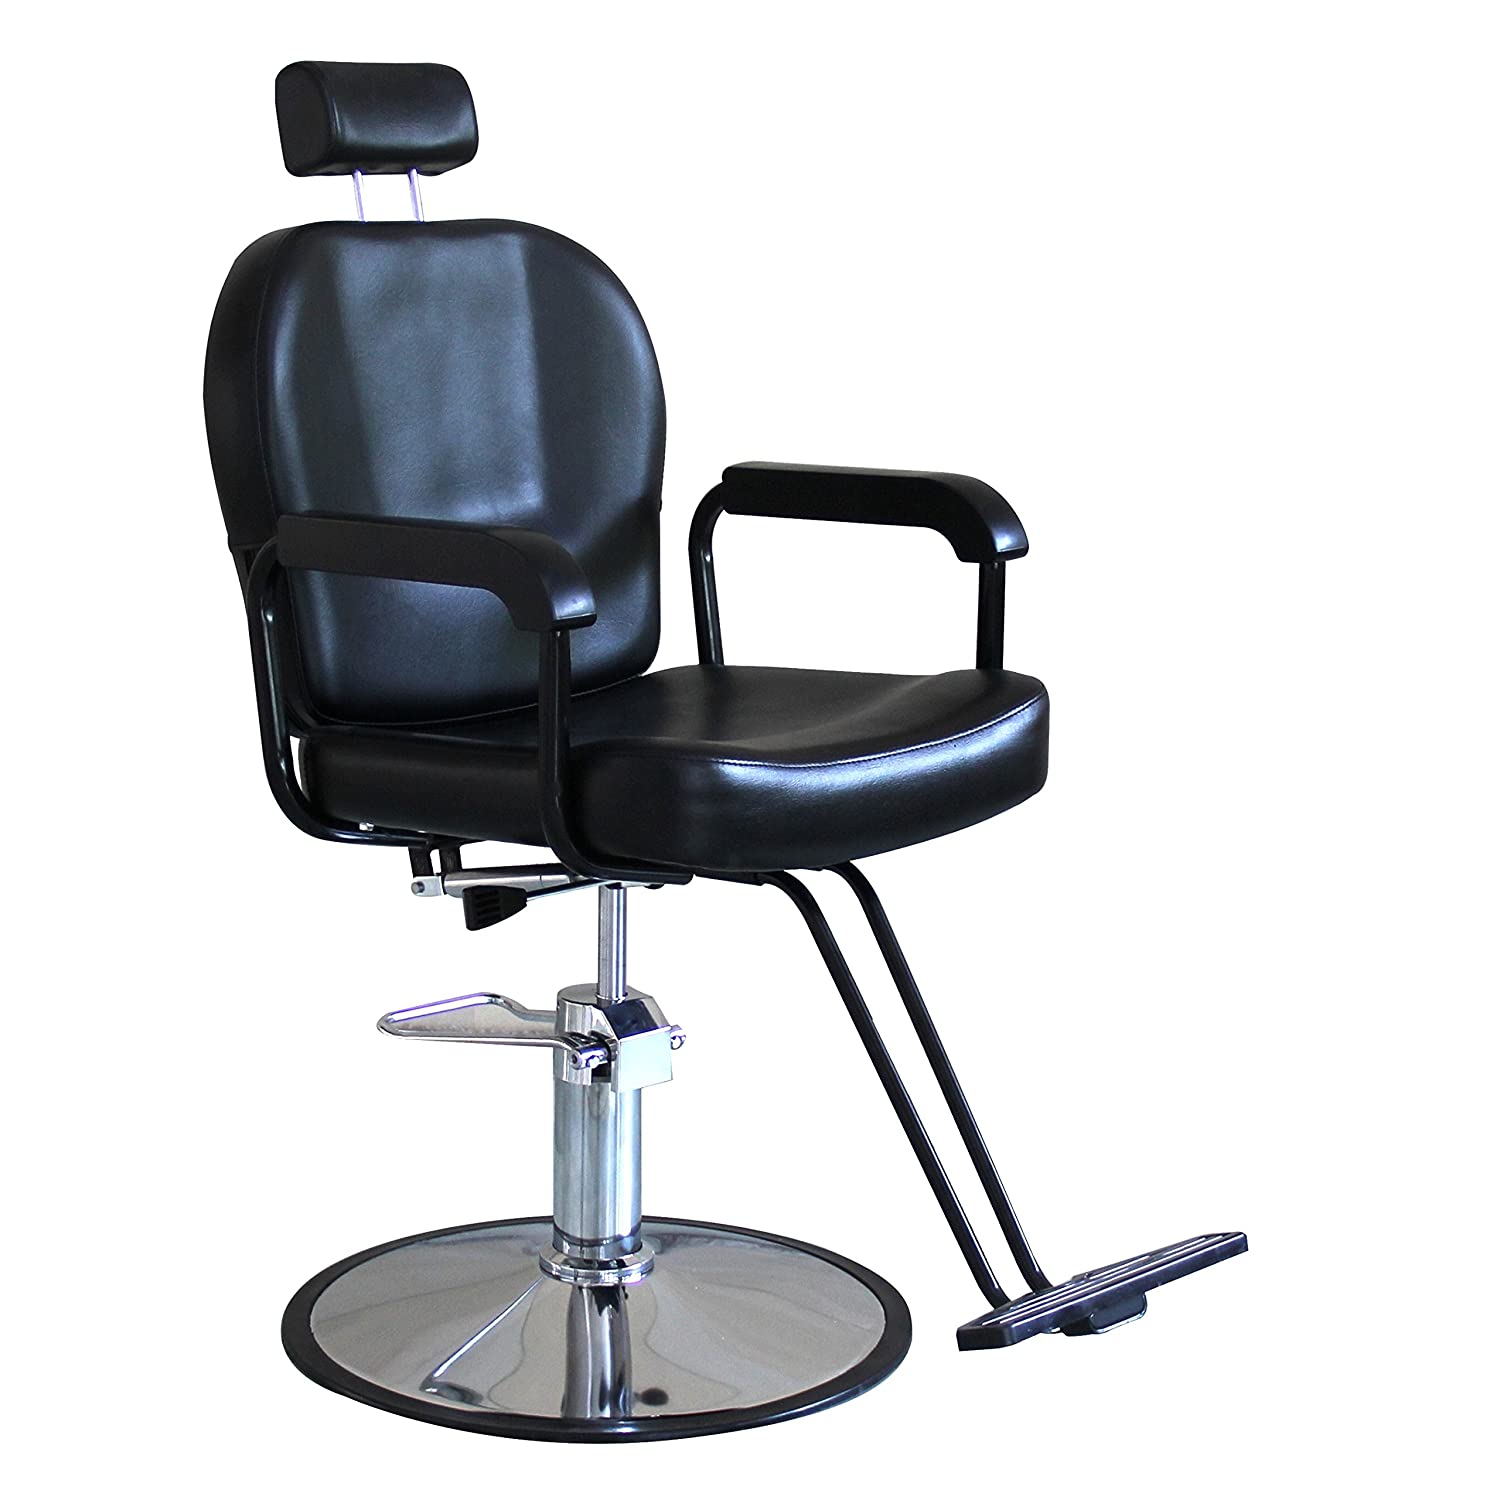 Shengyu Styling Barber Chair